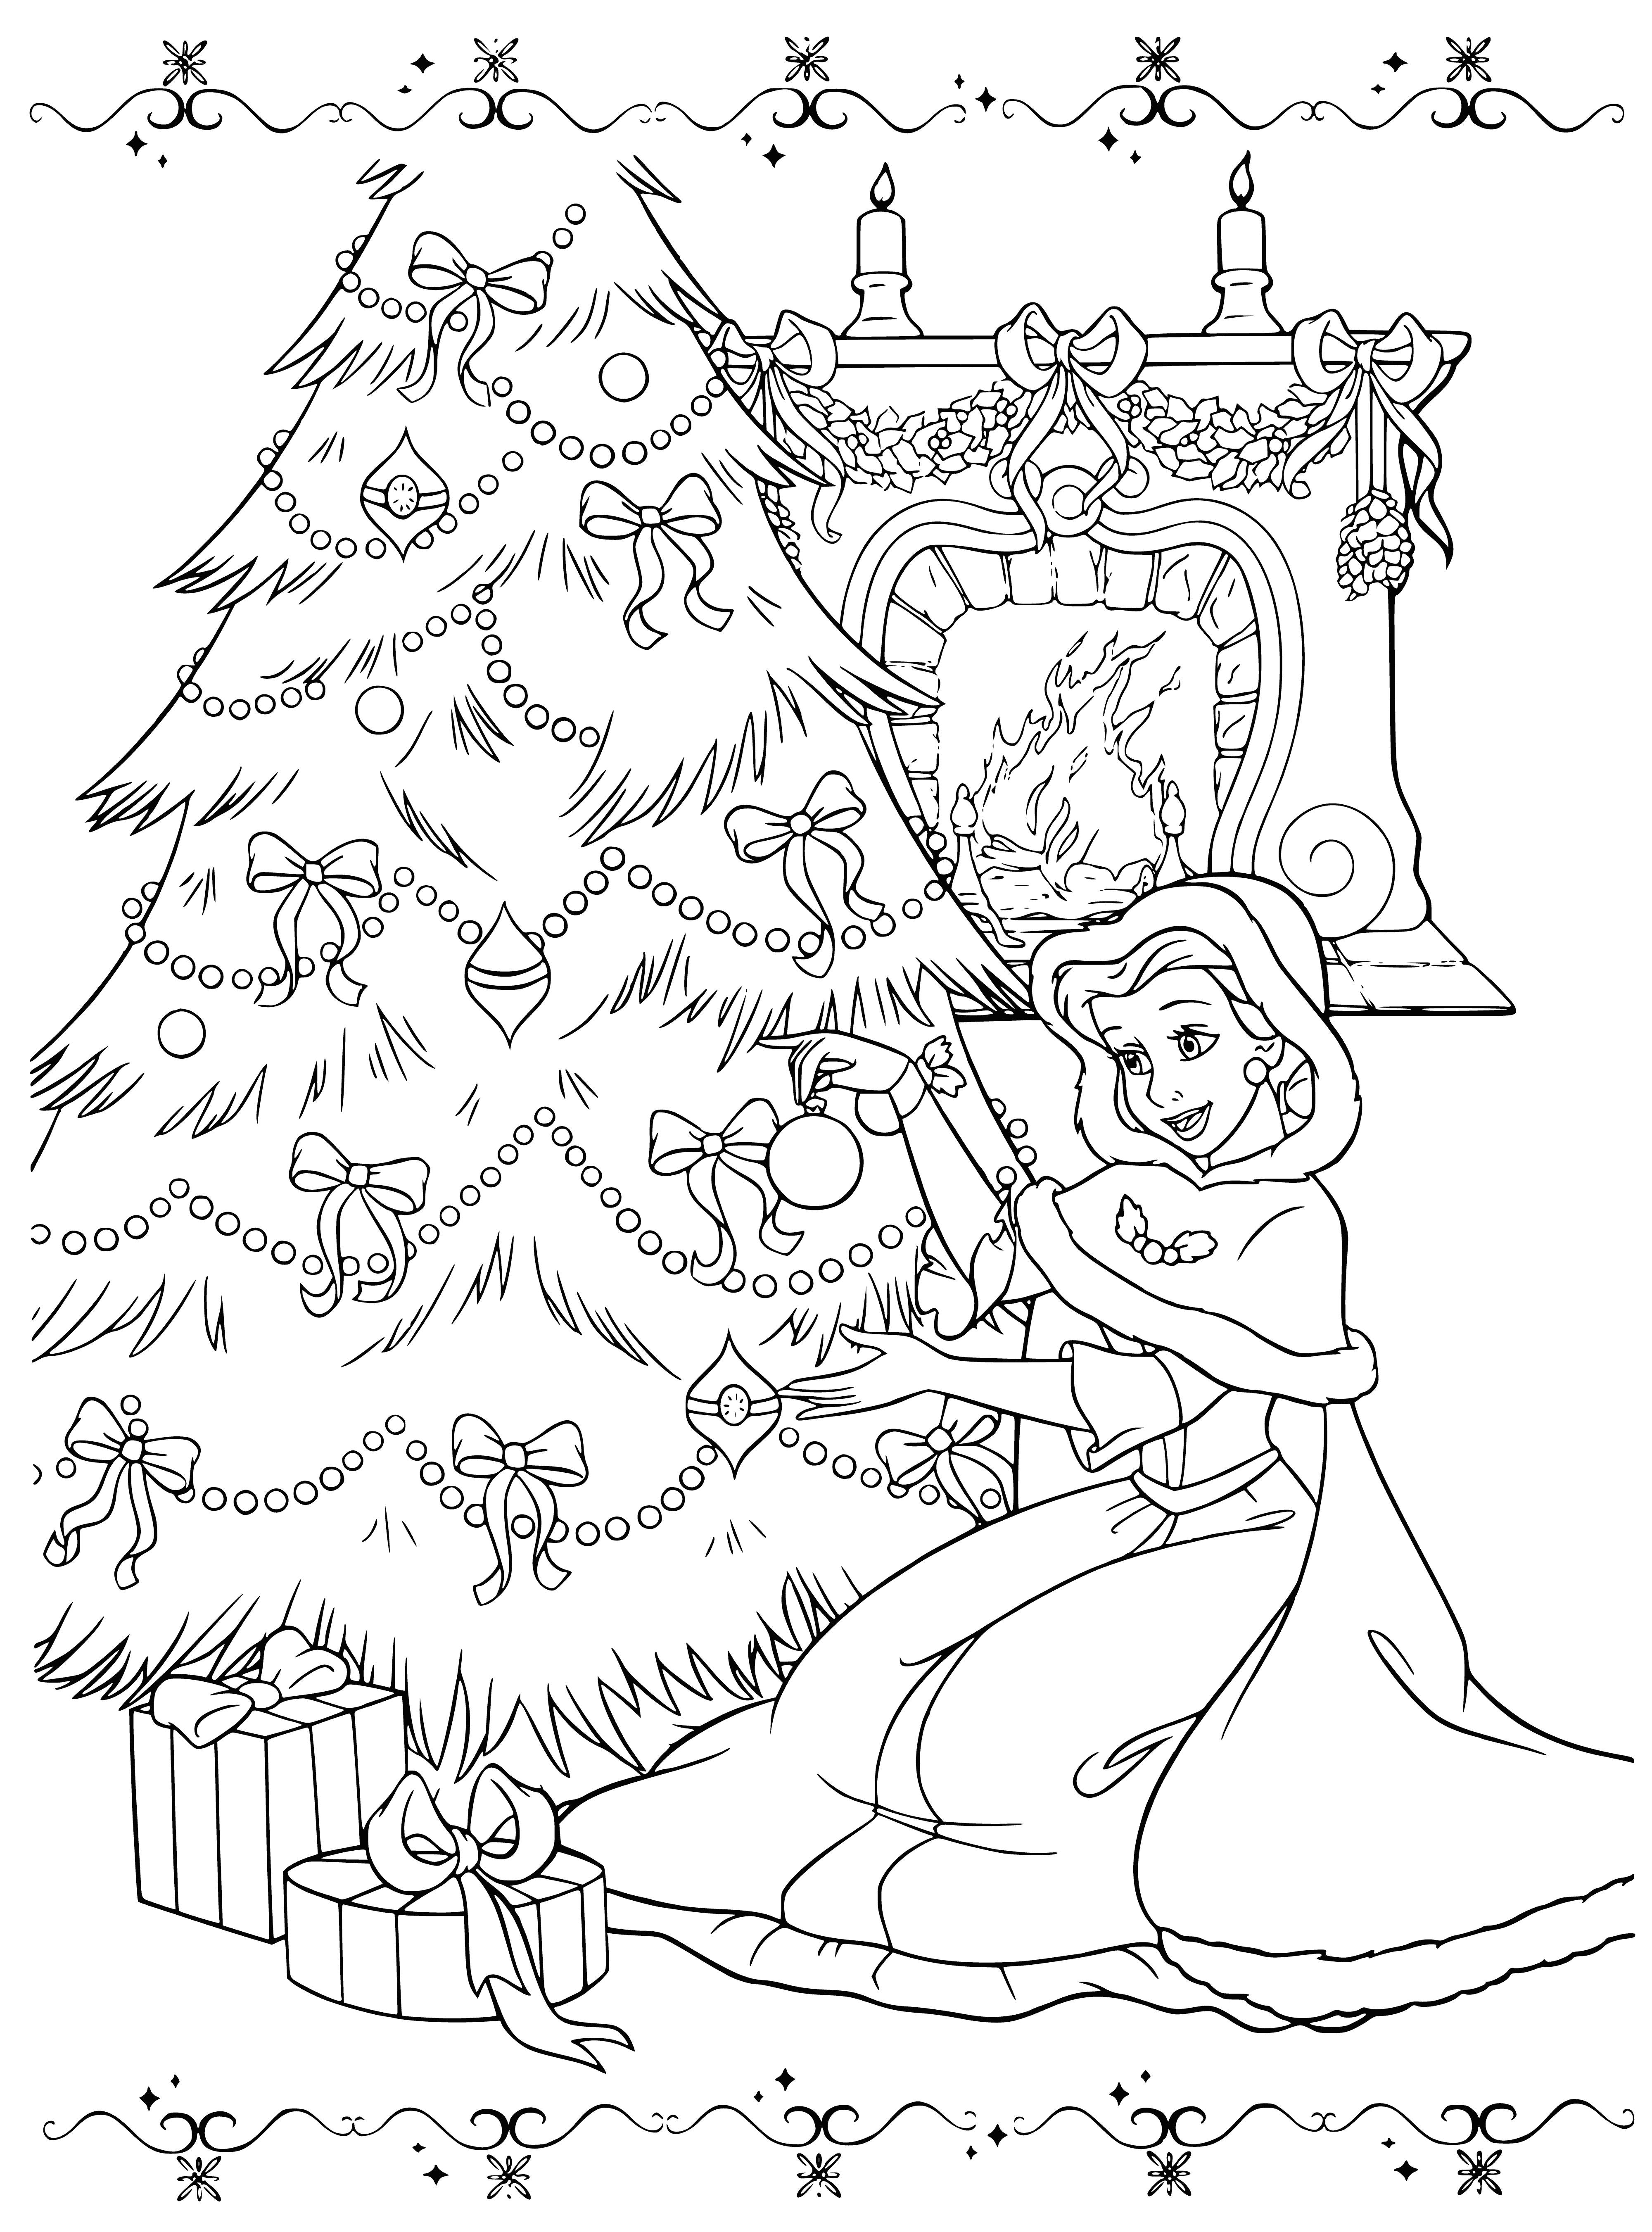 Coloring pages new for 2020: gorgeous and vibrant